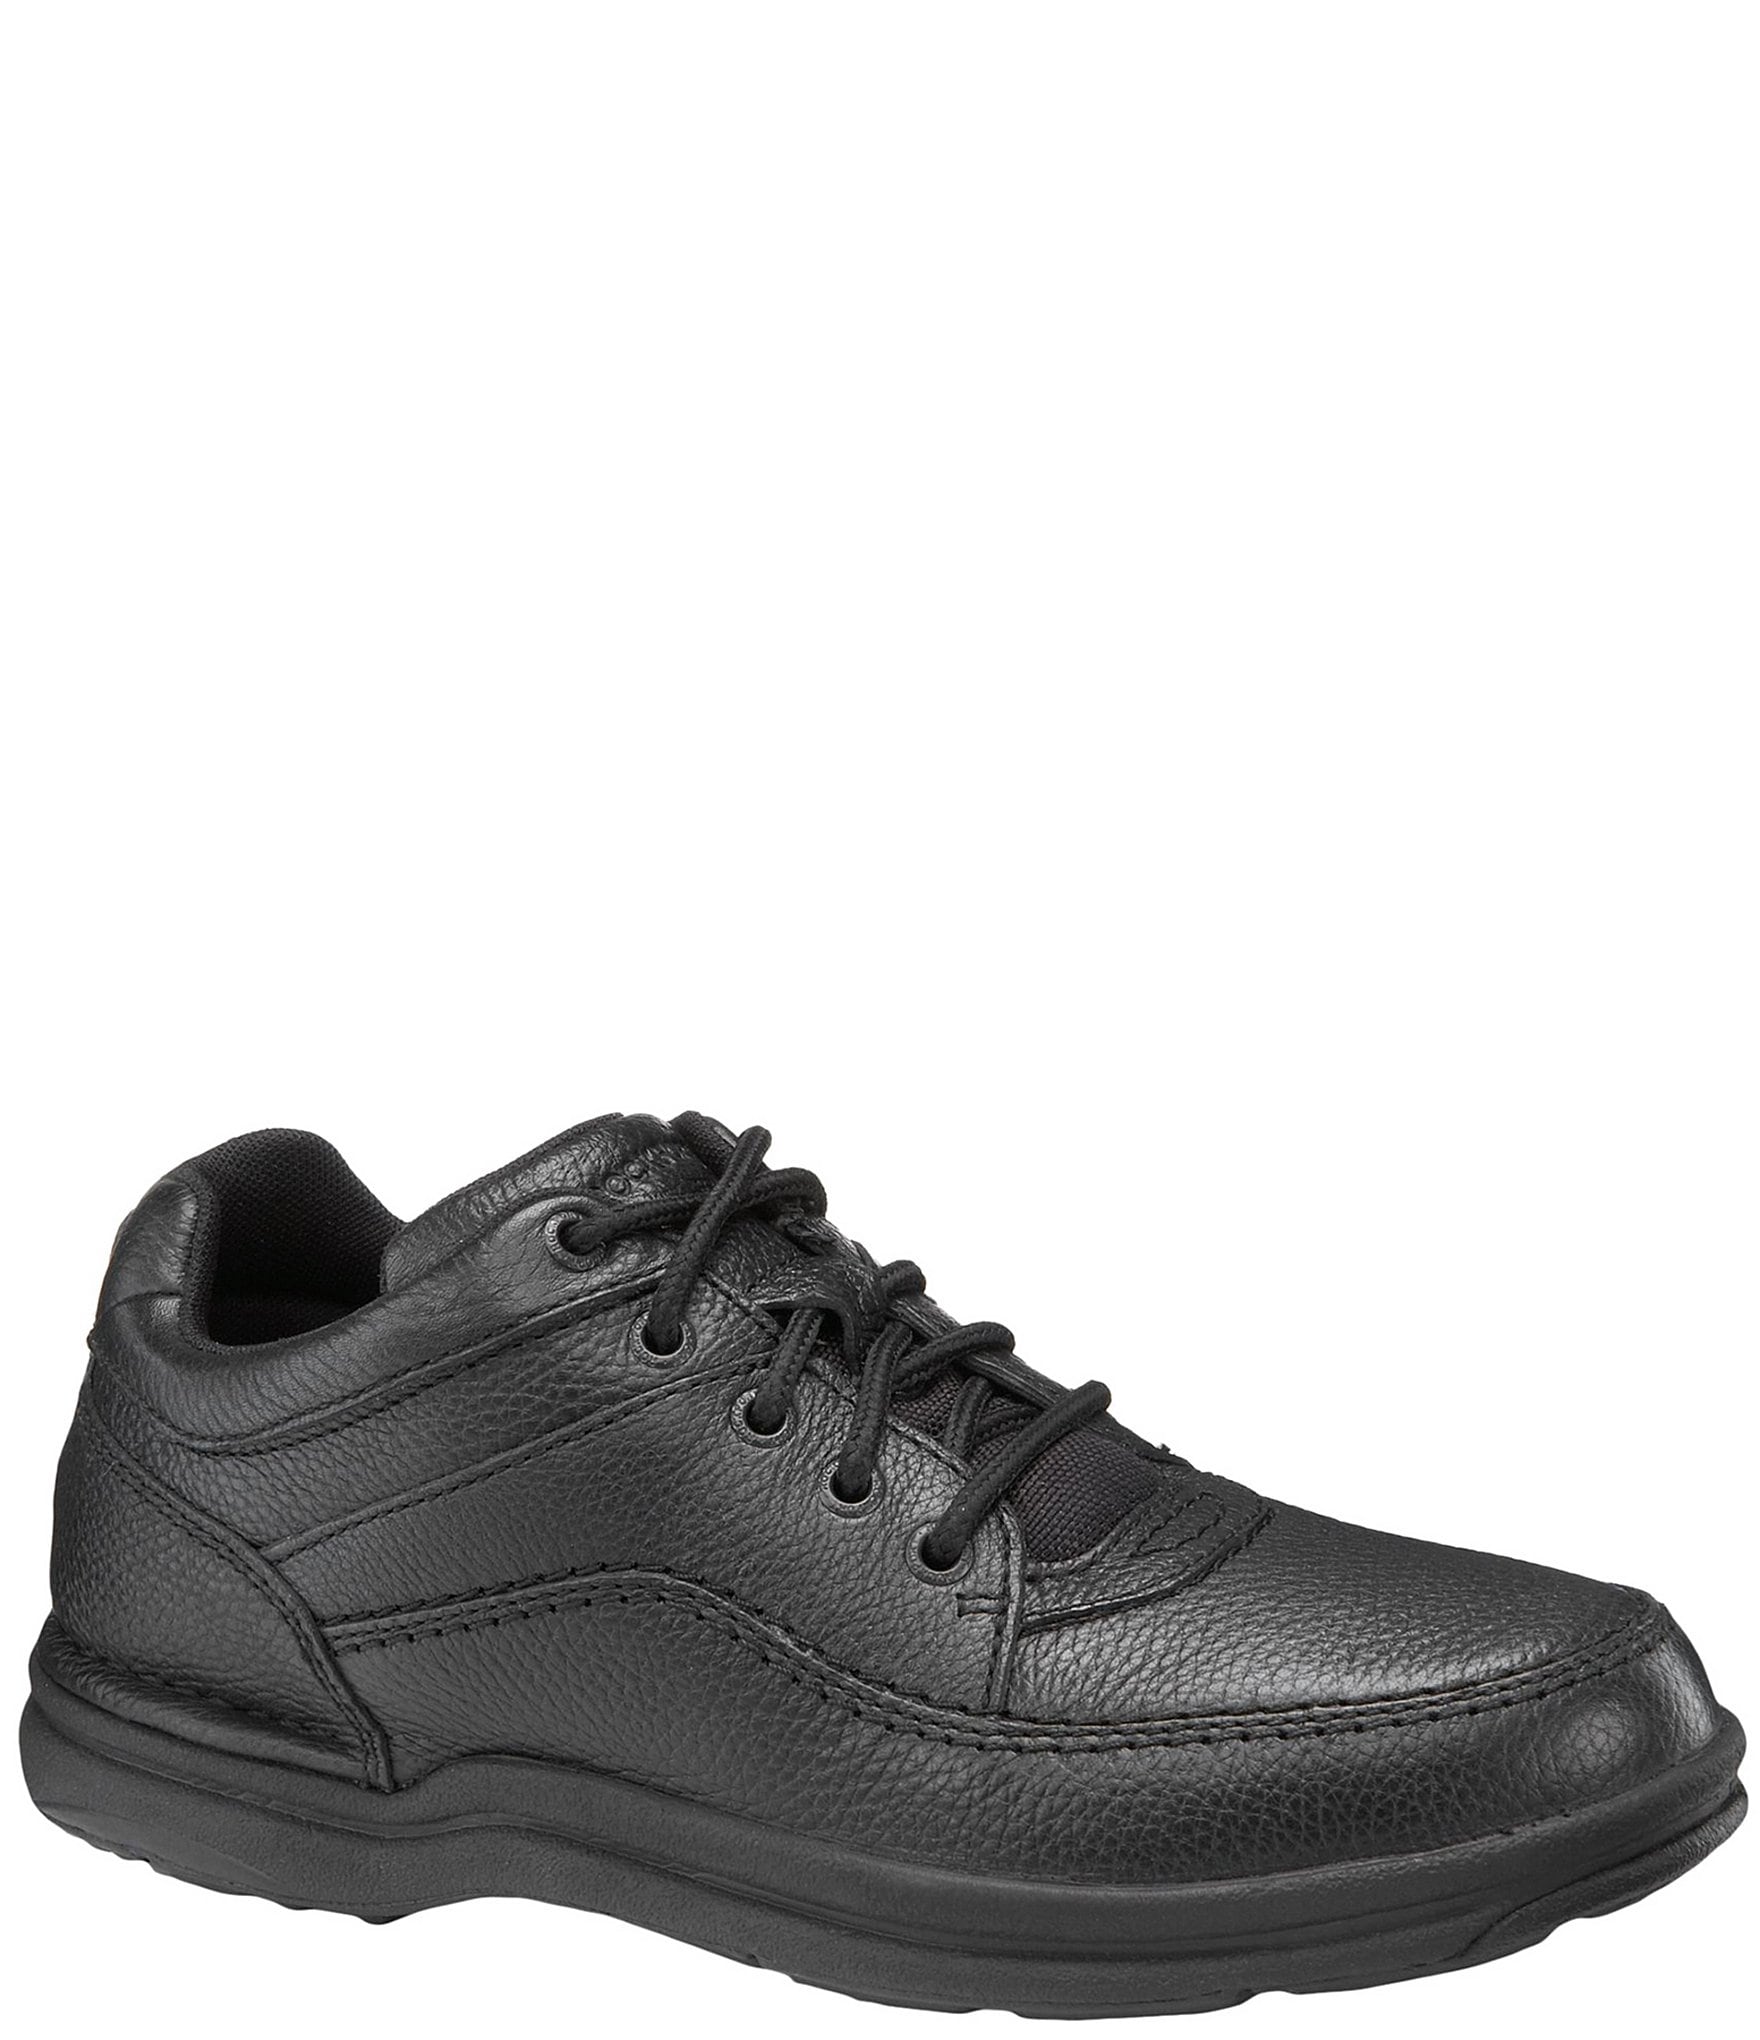 Rockport World Tour Classic Men's Leather Oxfords Comfort Casual Walking Shoes 